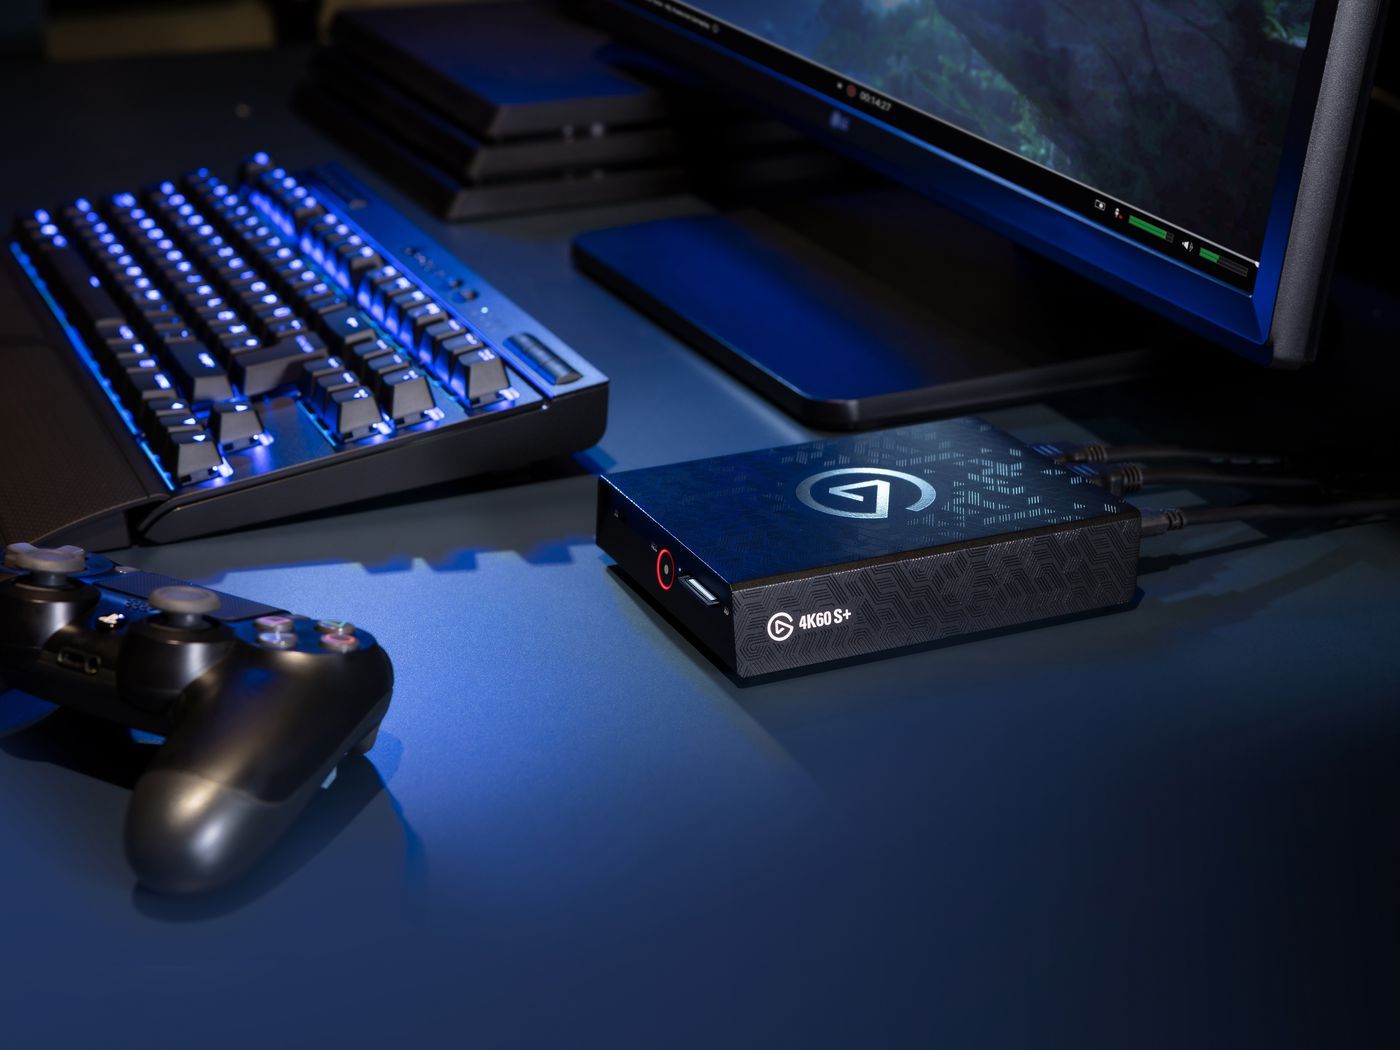 Elgato's new 4K 60 S+ capture card is a much easier way to stream 4K HDR 60fps